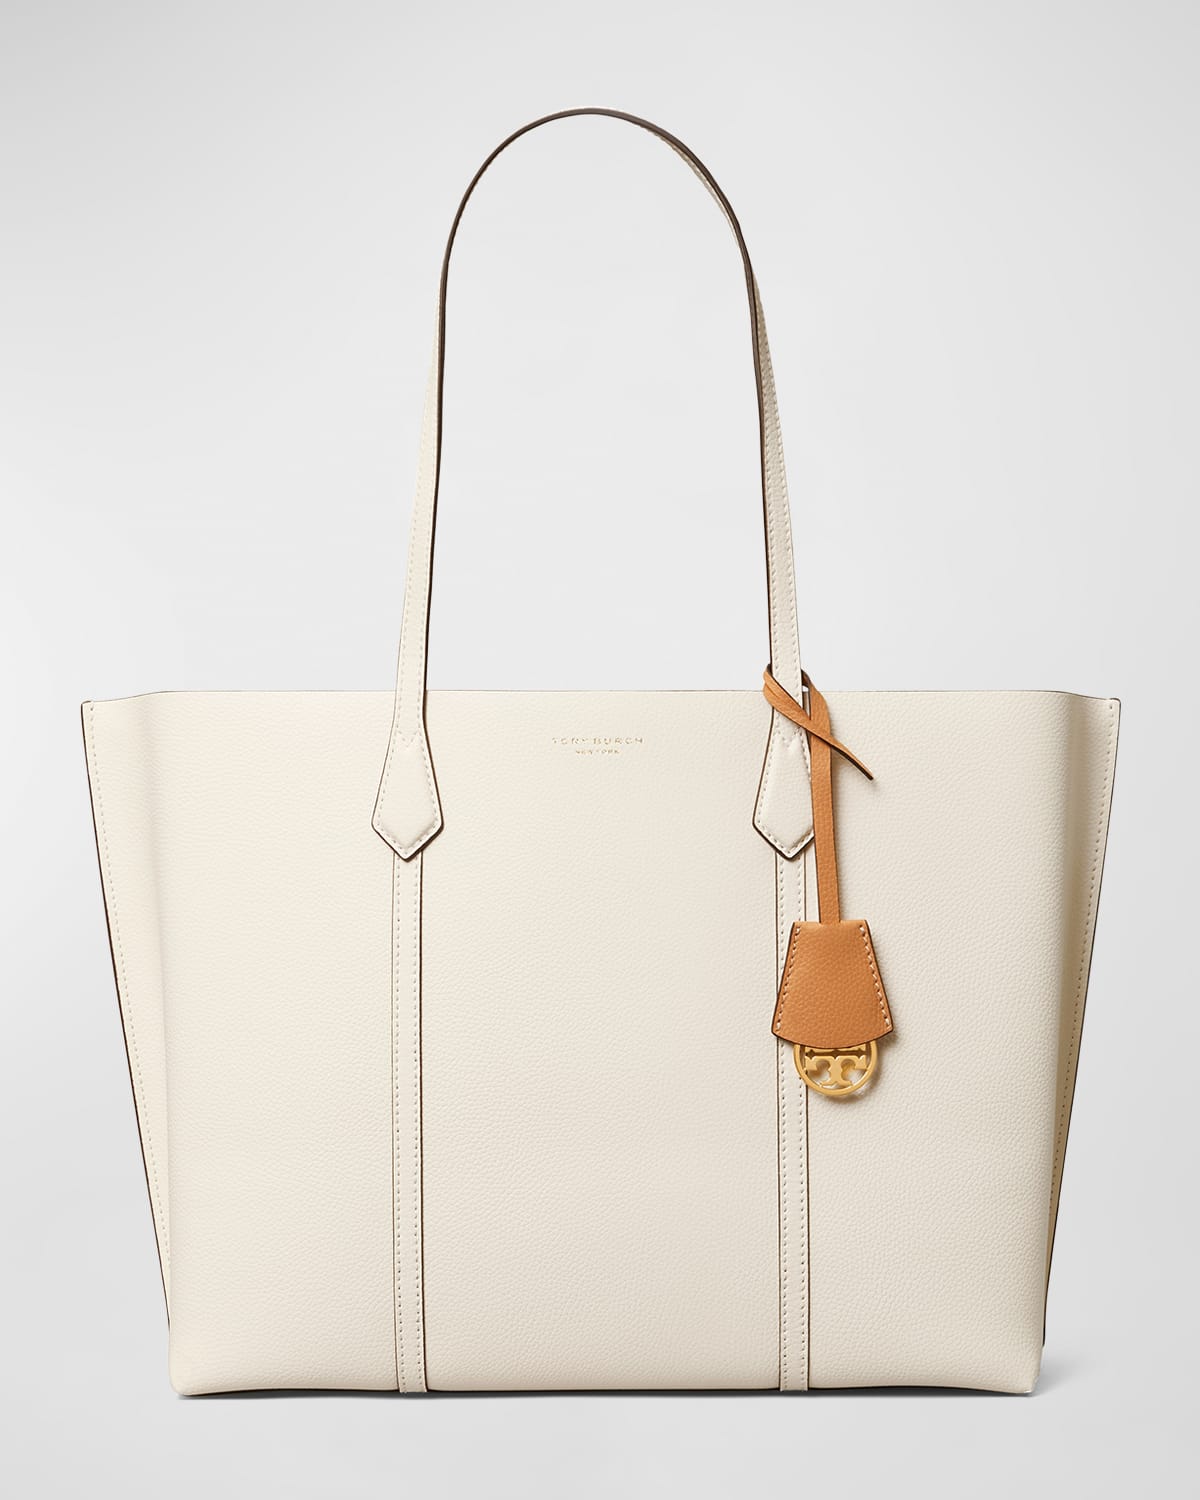 TORY BURCH PERRY LEATHER SHOPPER TOTE BAG